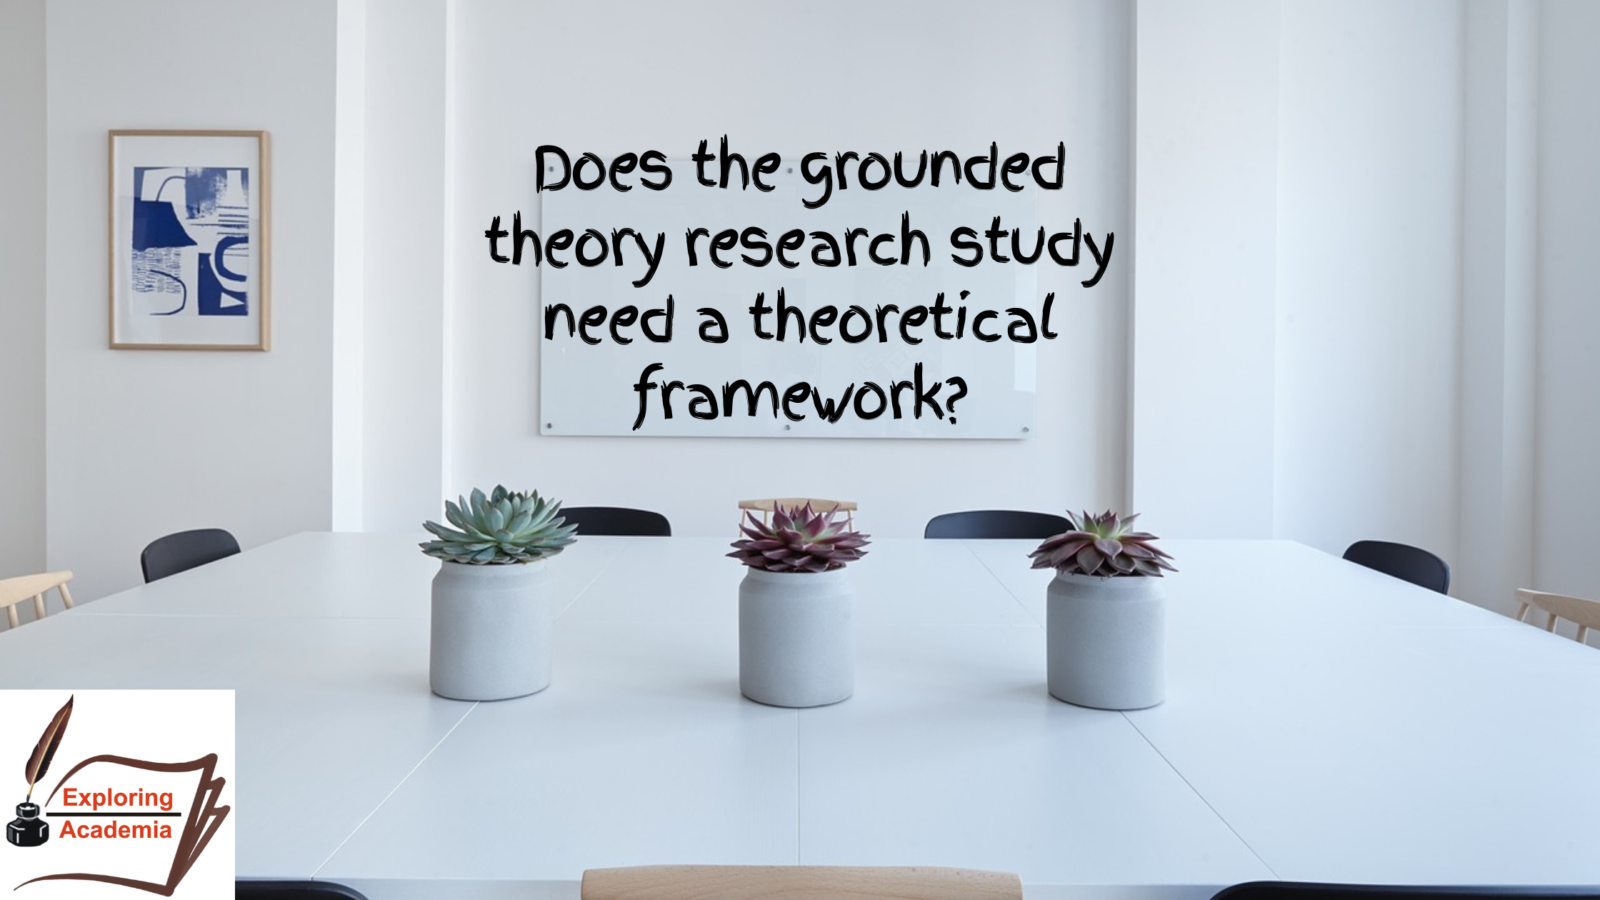 Does the grounded theory research study need a theoretical framework?